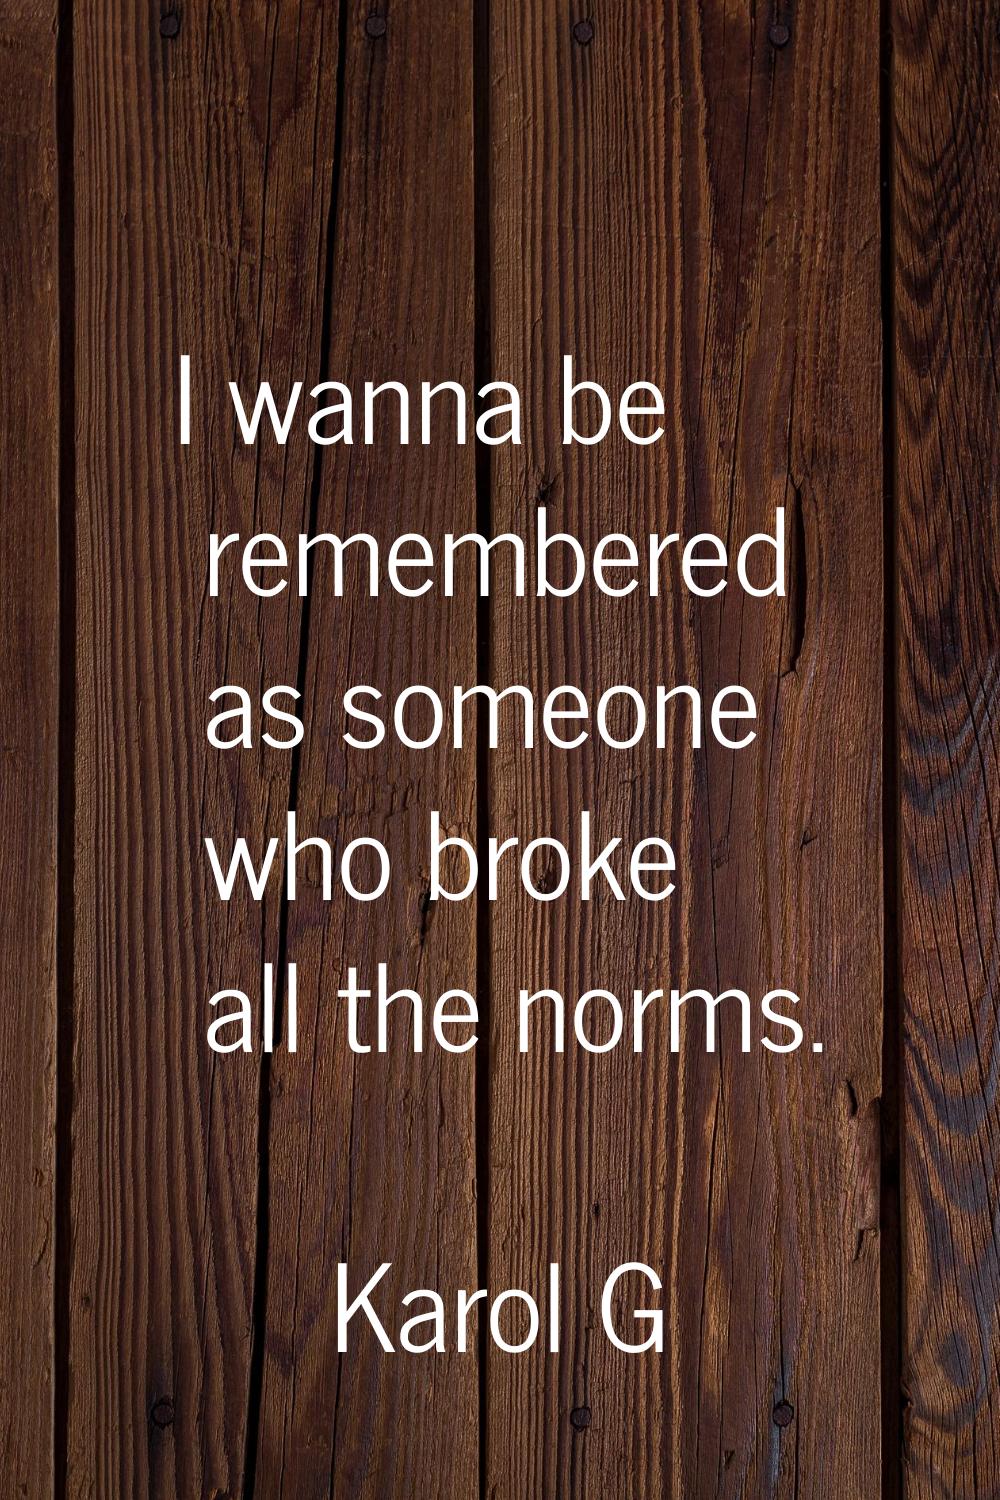 I wanna be remembered as someone who broke all the norms.